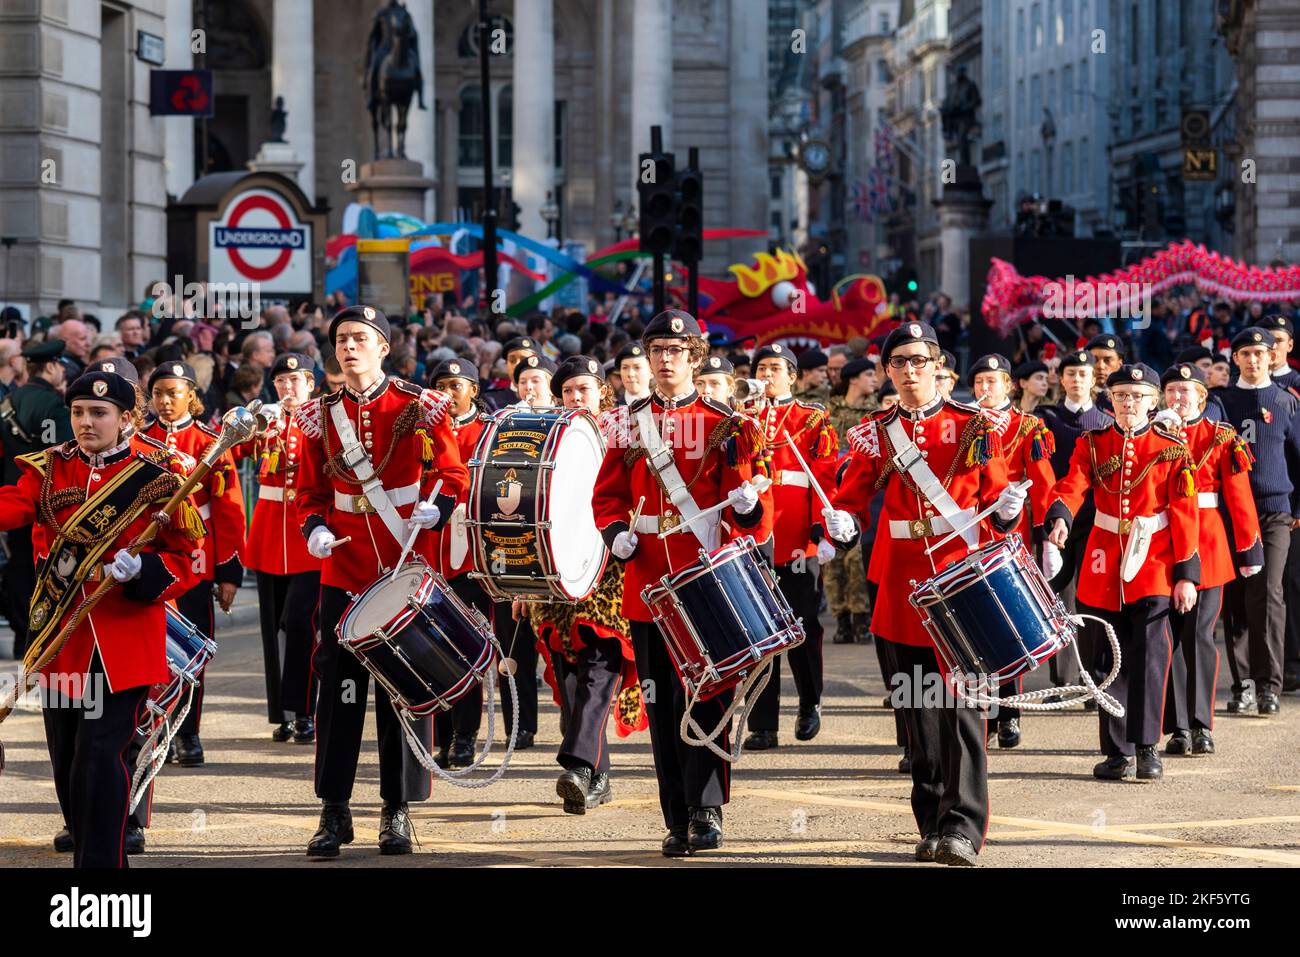 St Dunstan’s College Combined Cadet Force marching band at the Lord Mayor's Show parade in the City of London, UK Stock Photo